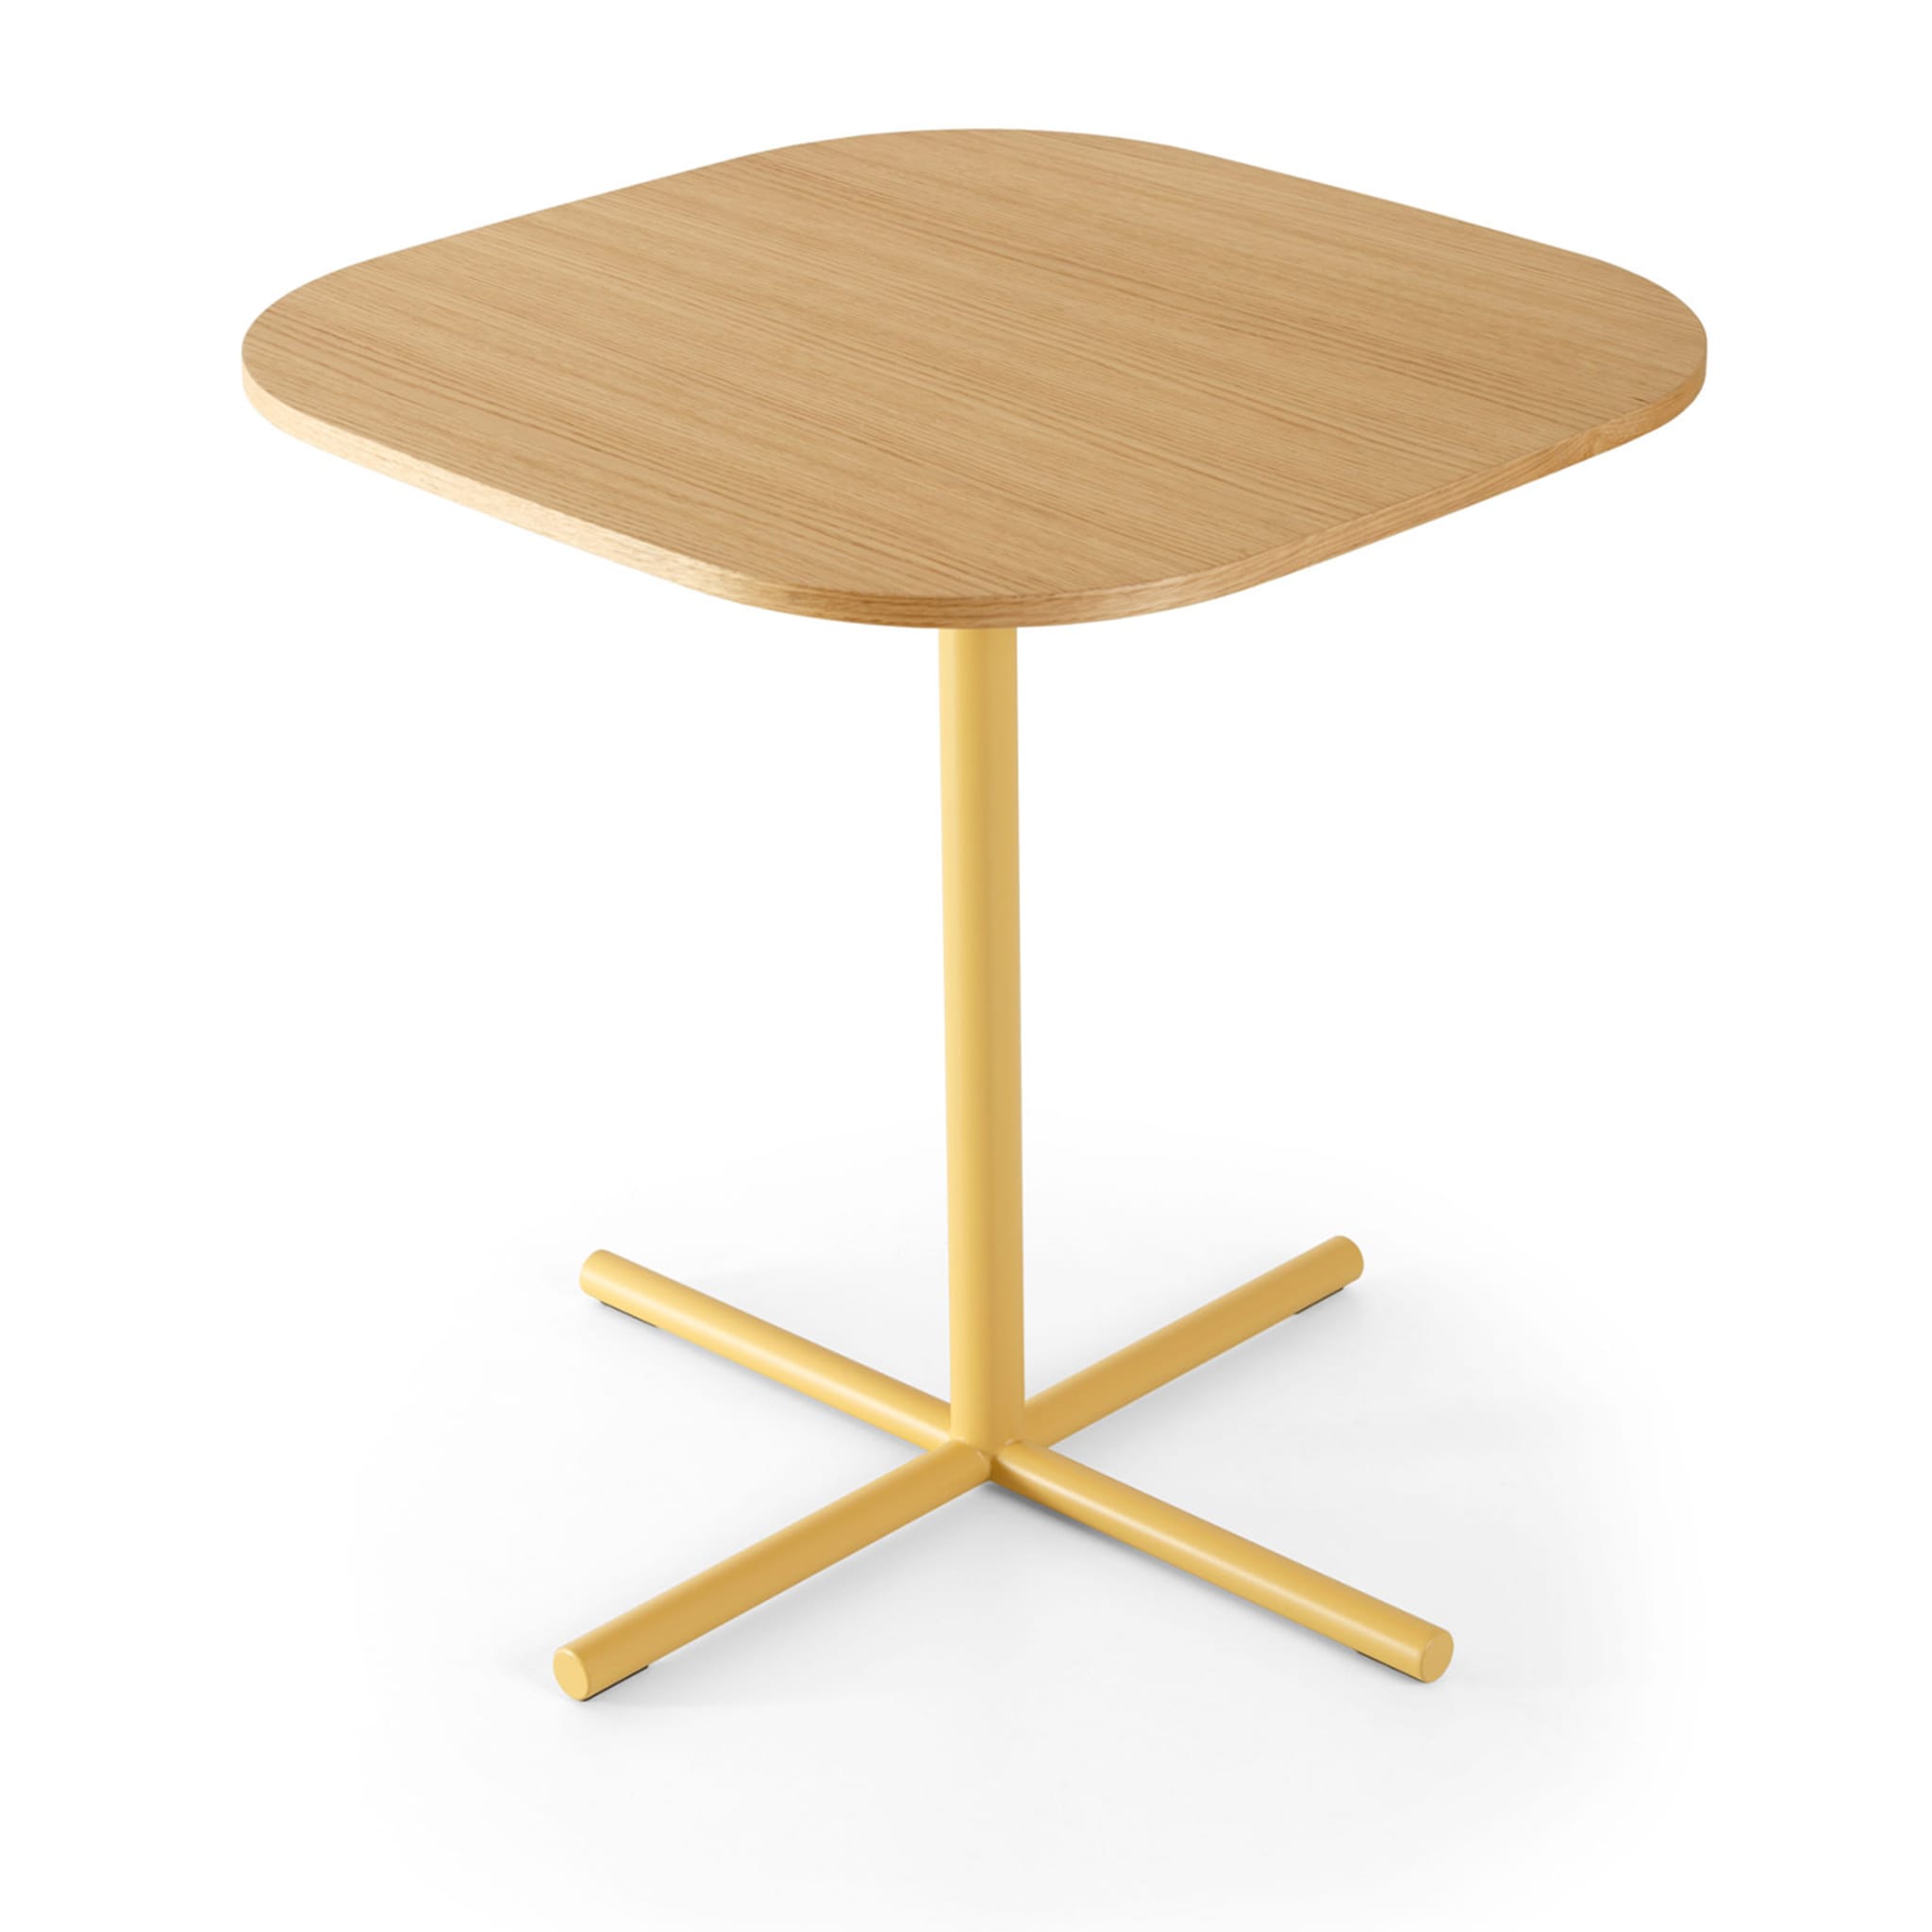 Notable Pastel-Yellow Accent Table  - Alternative view 1